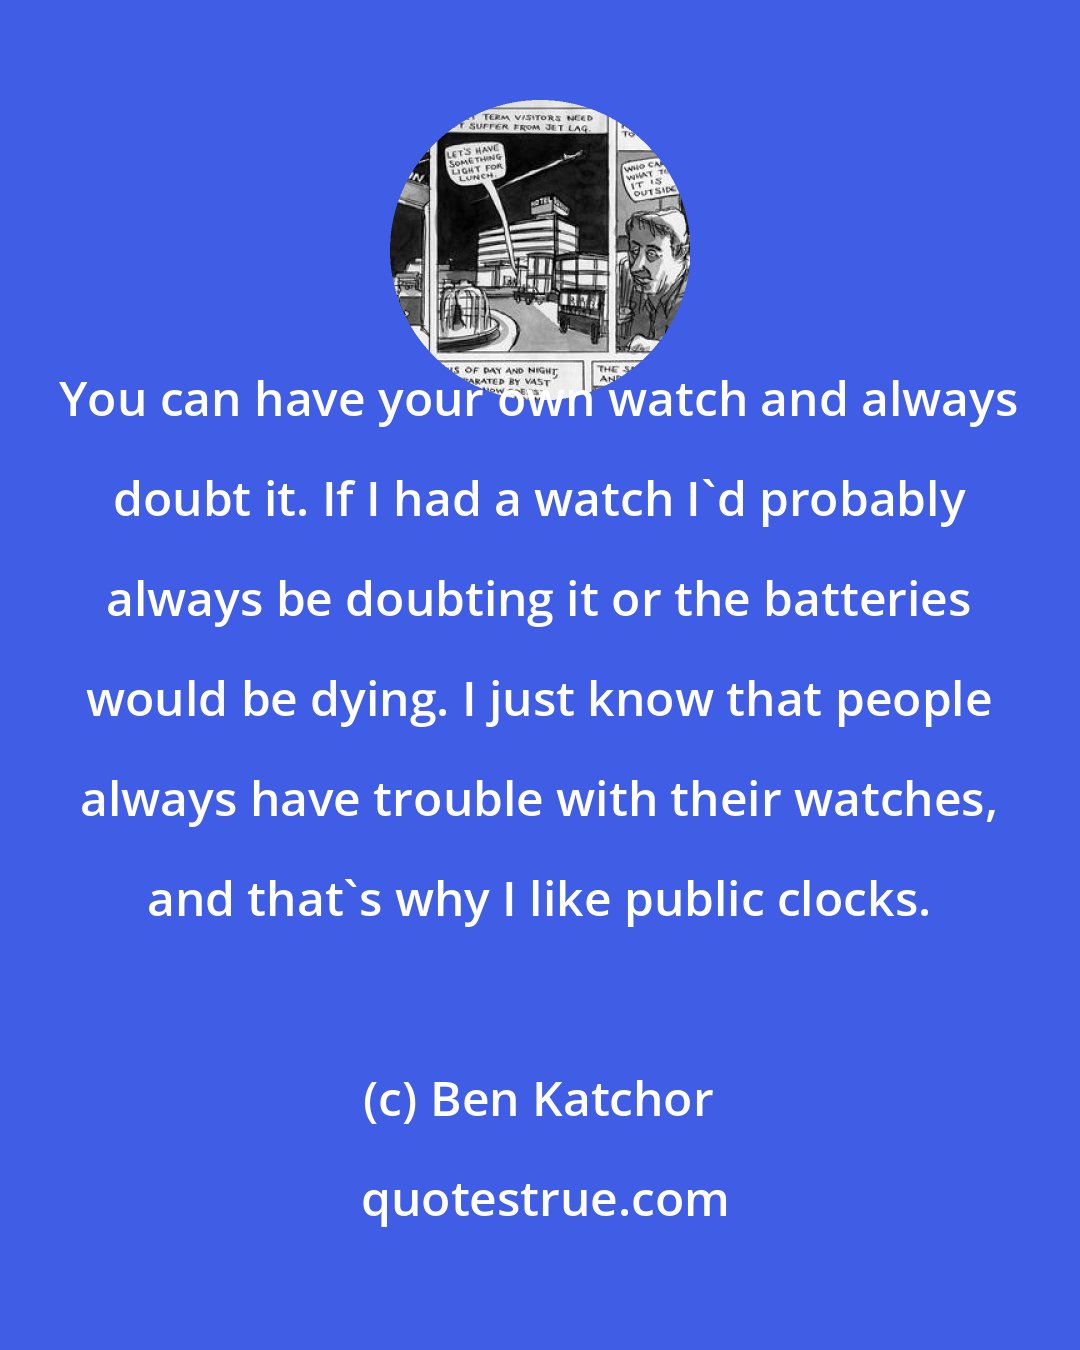 Ben Katchor: You can have your own watch and always doubt it. If I had a watch I'd probably always be doubting it or the batteries would be dying. I just know that people always have trouble with their watches, and that's why I like public clocks.